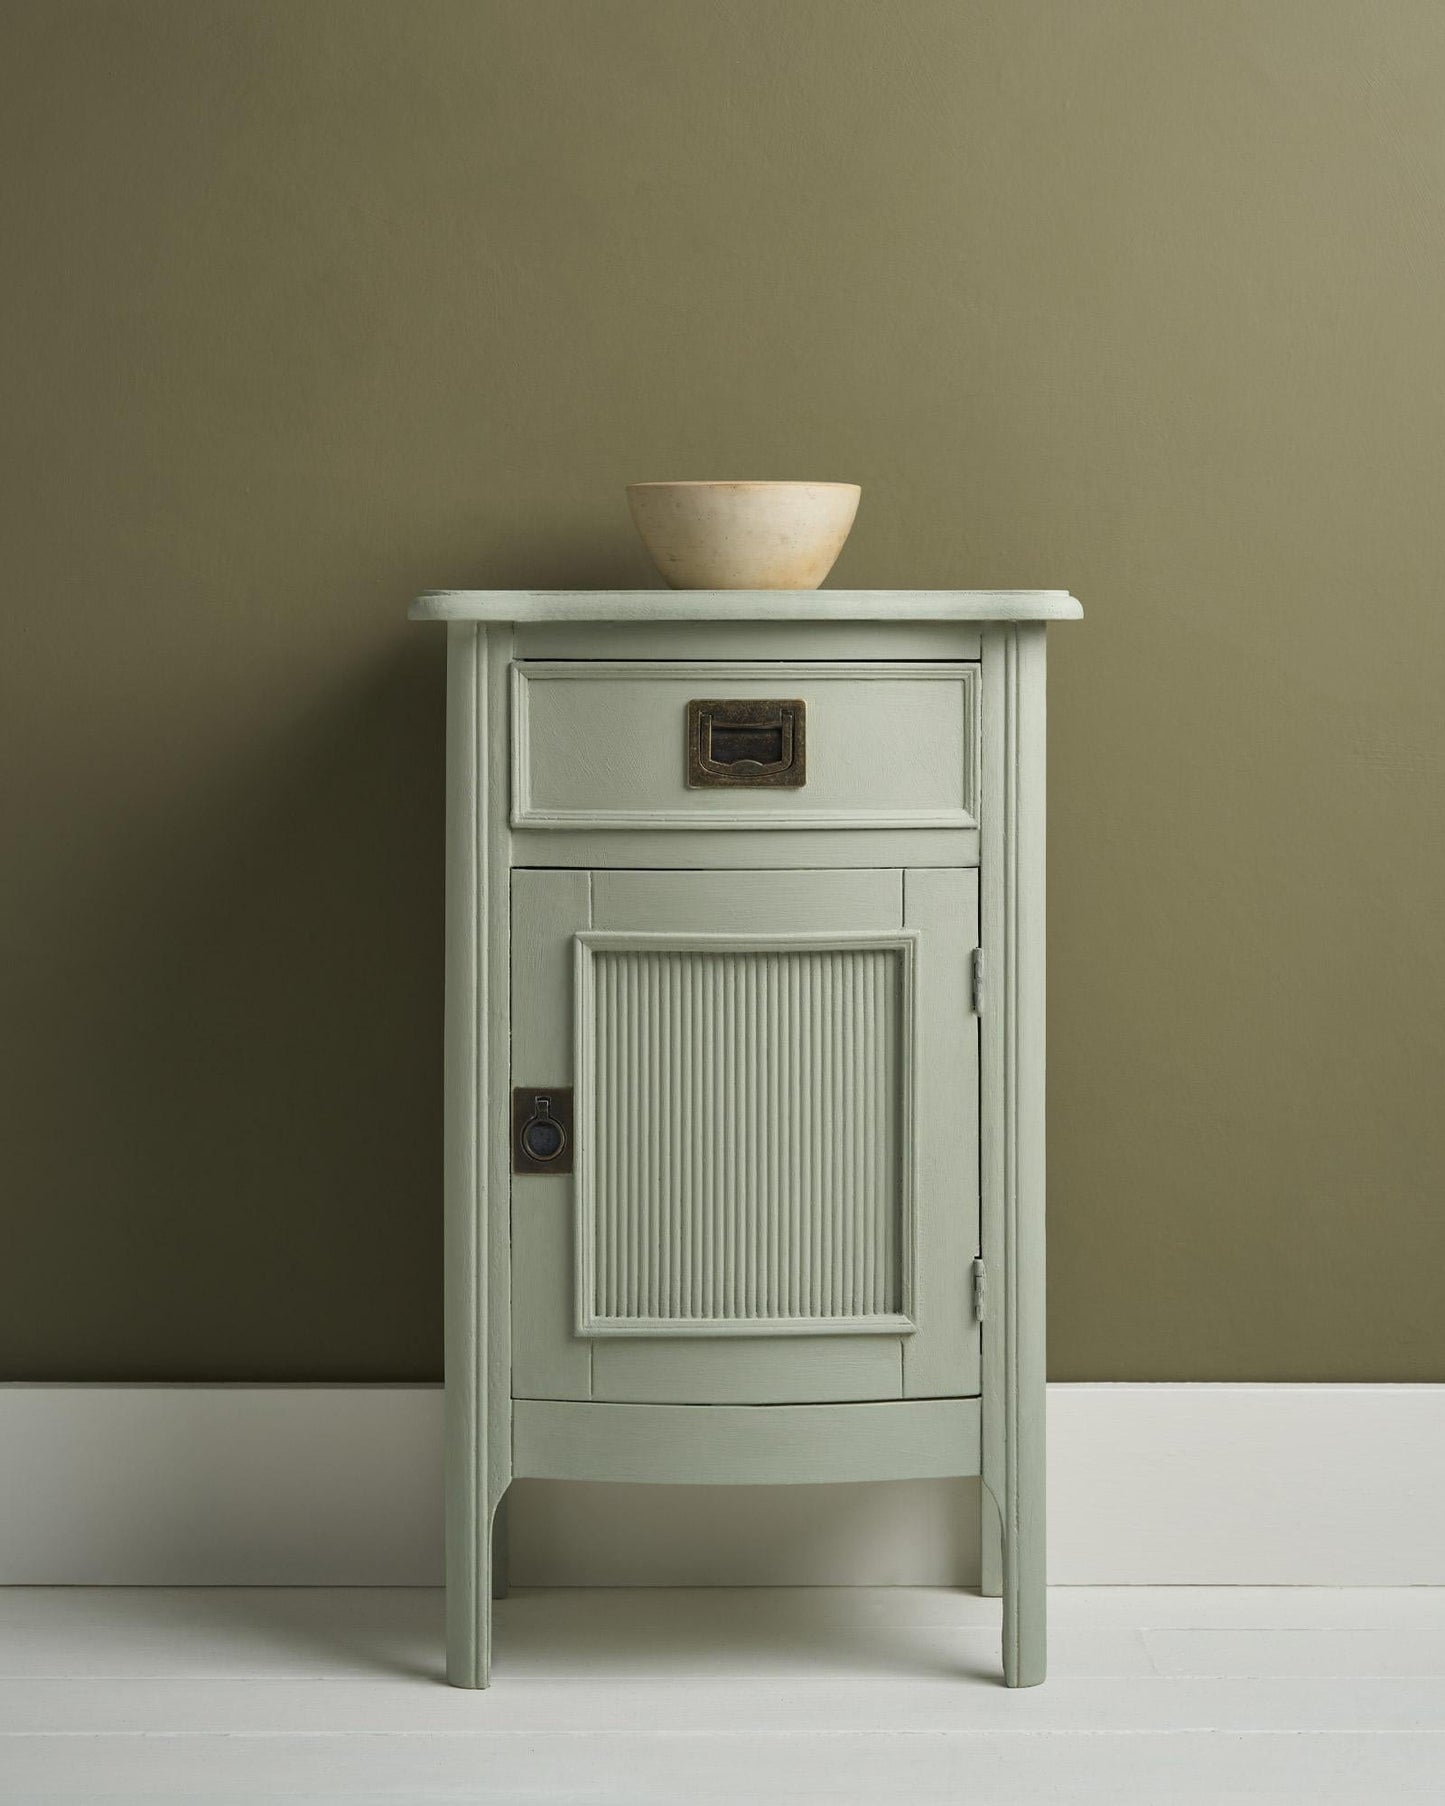 The Owl Box Chalk Paint® by Annie Sloan Coolabah Green